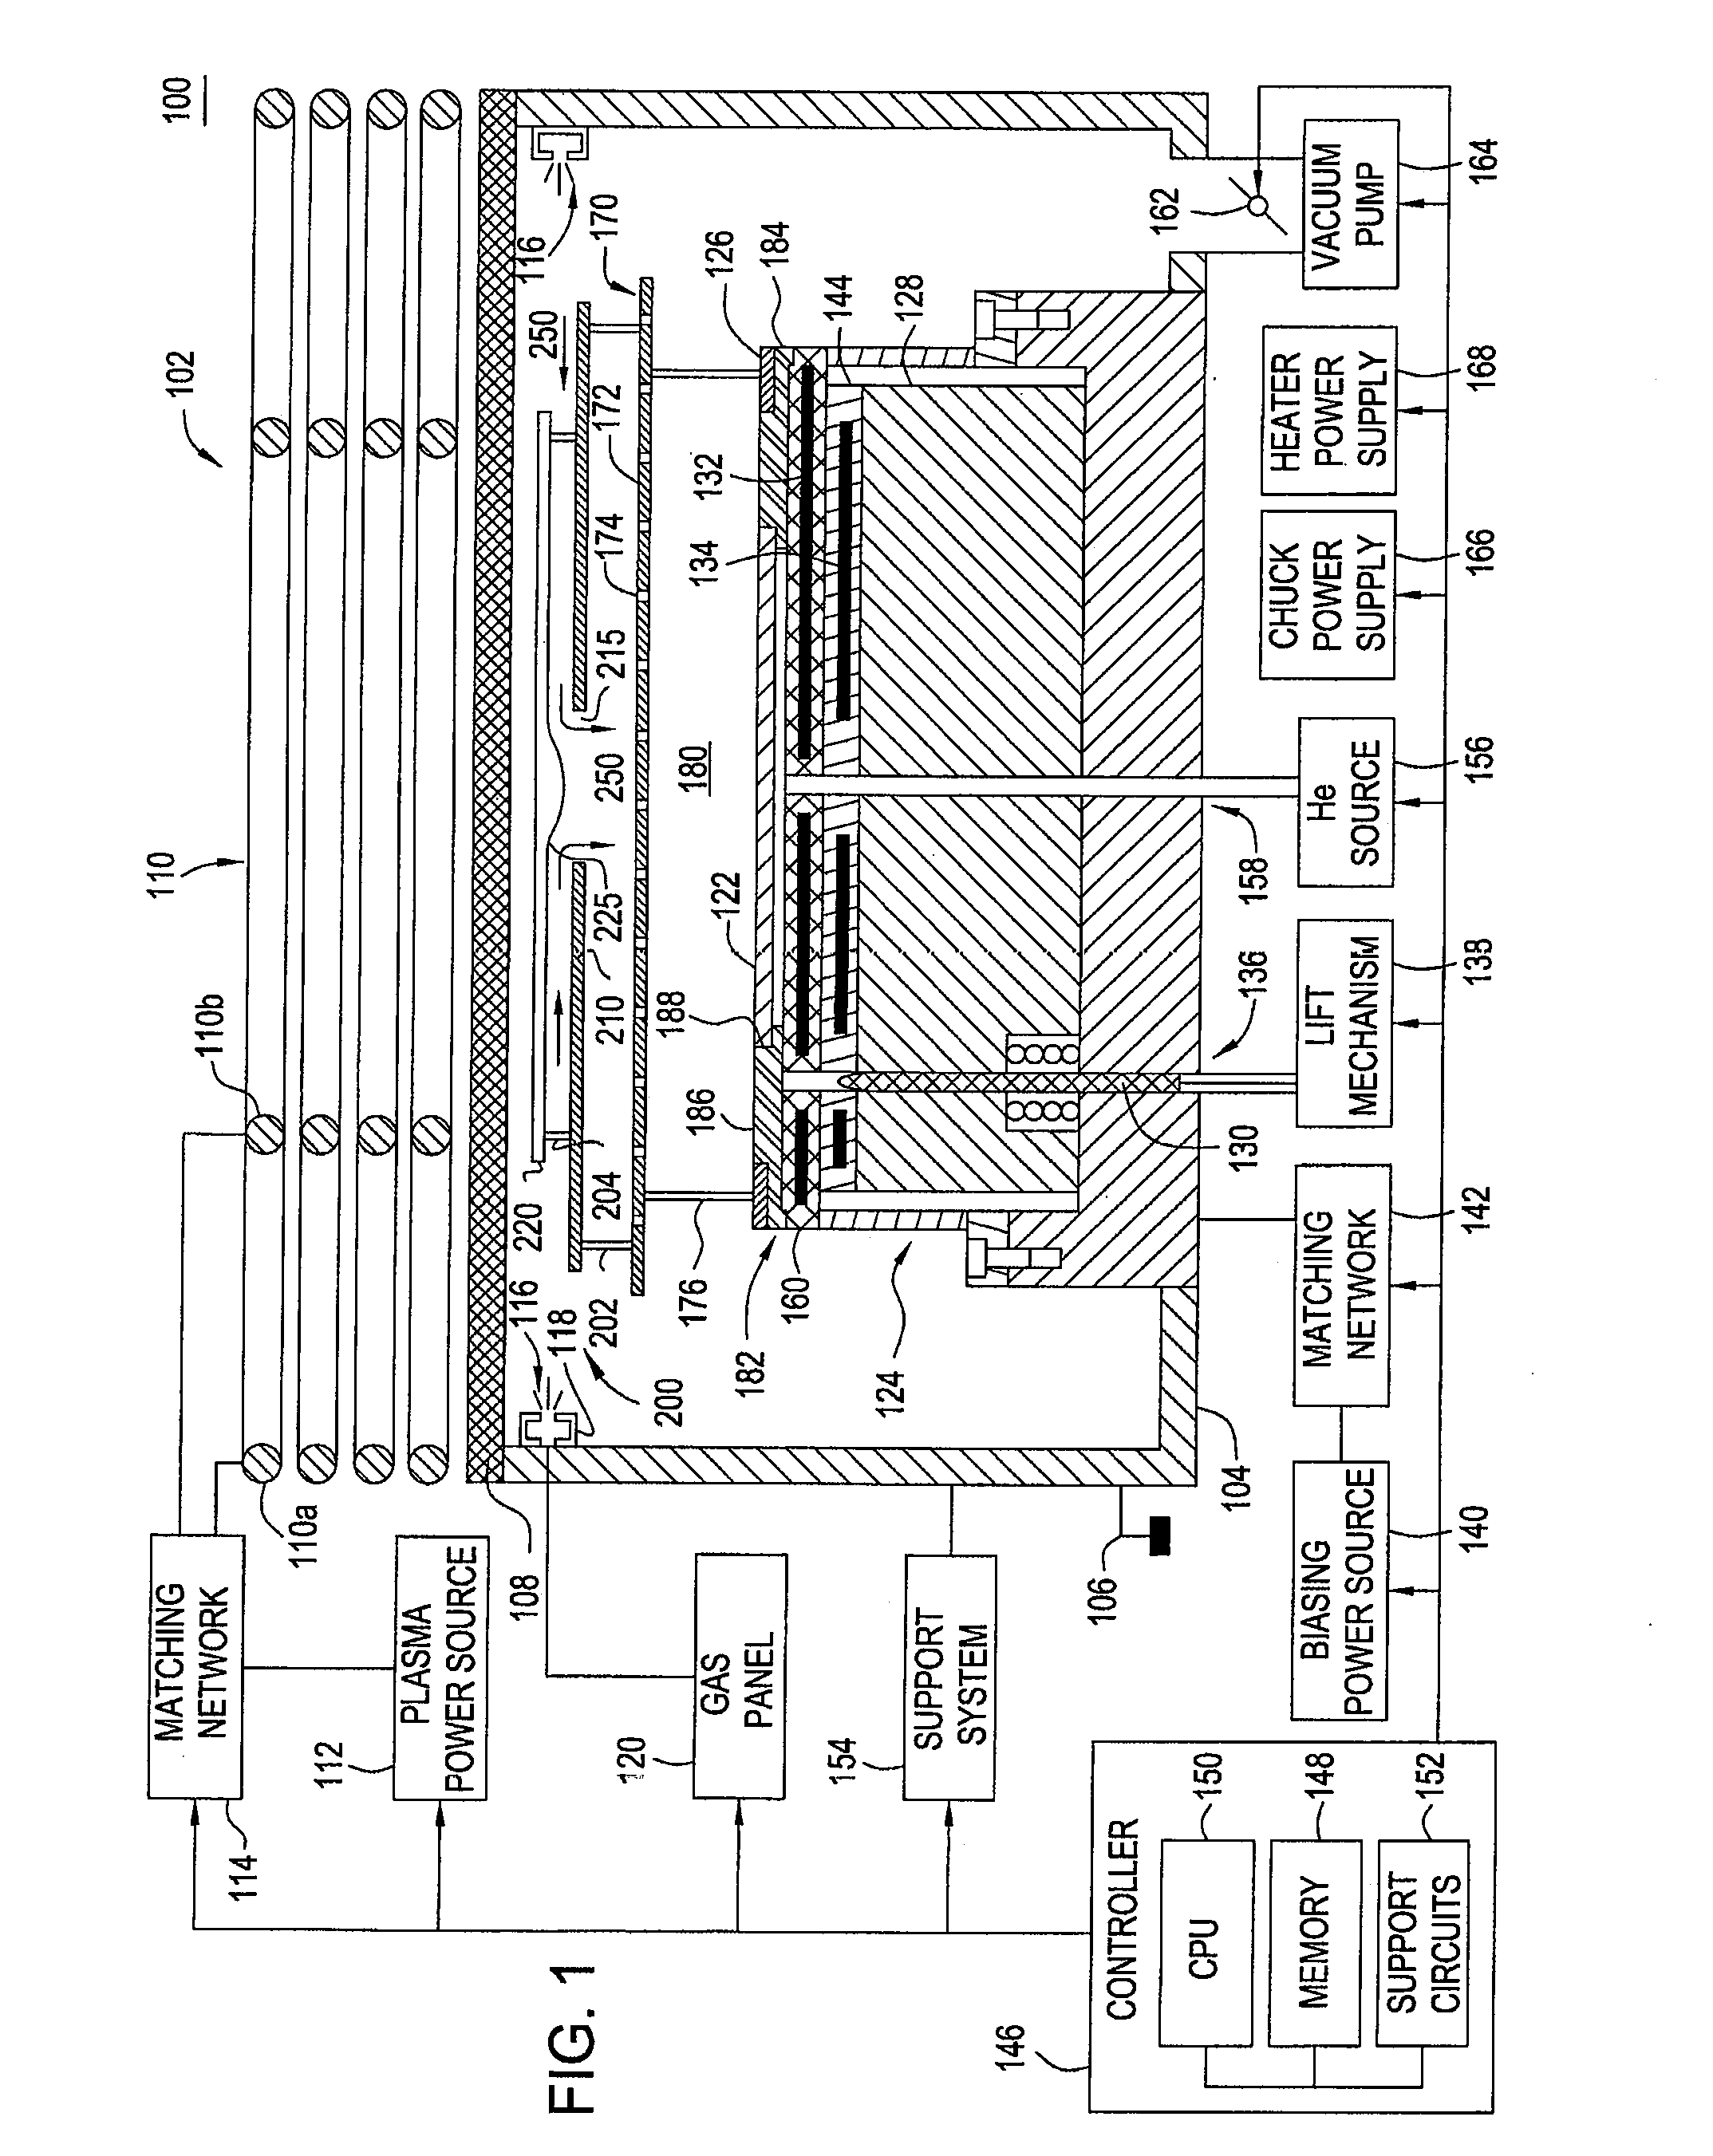 Method and apparatus for photomask plasma etching